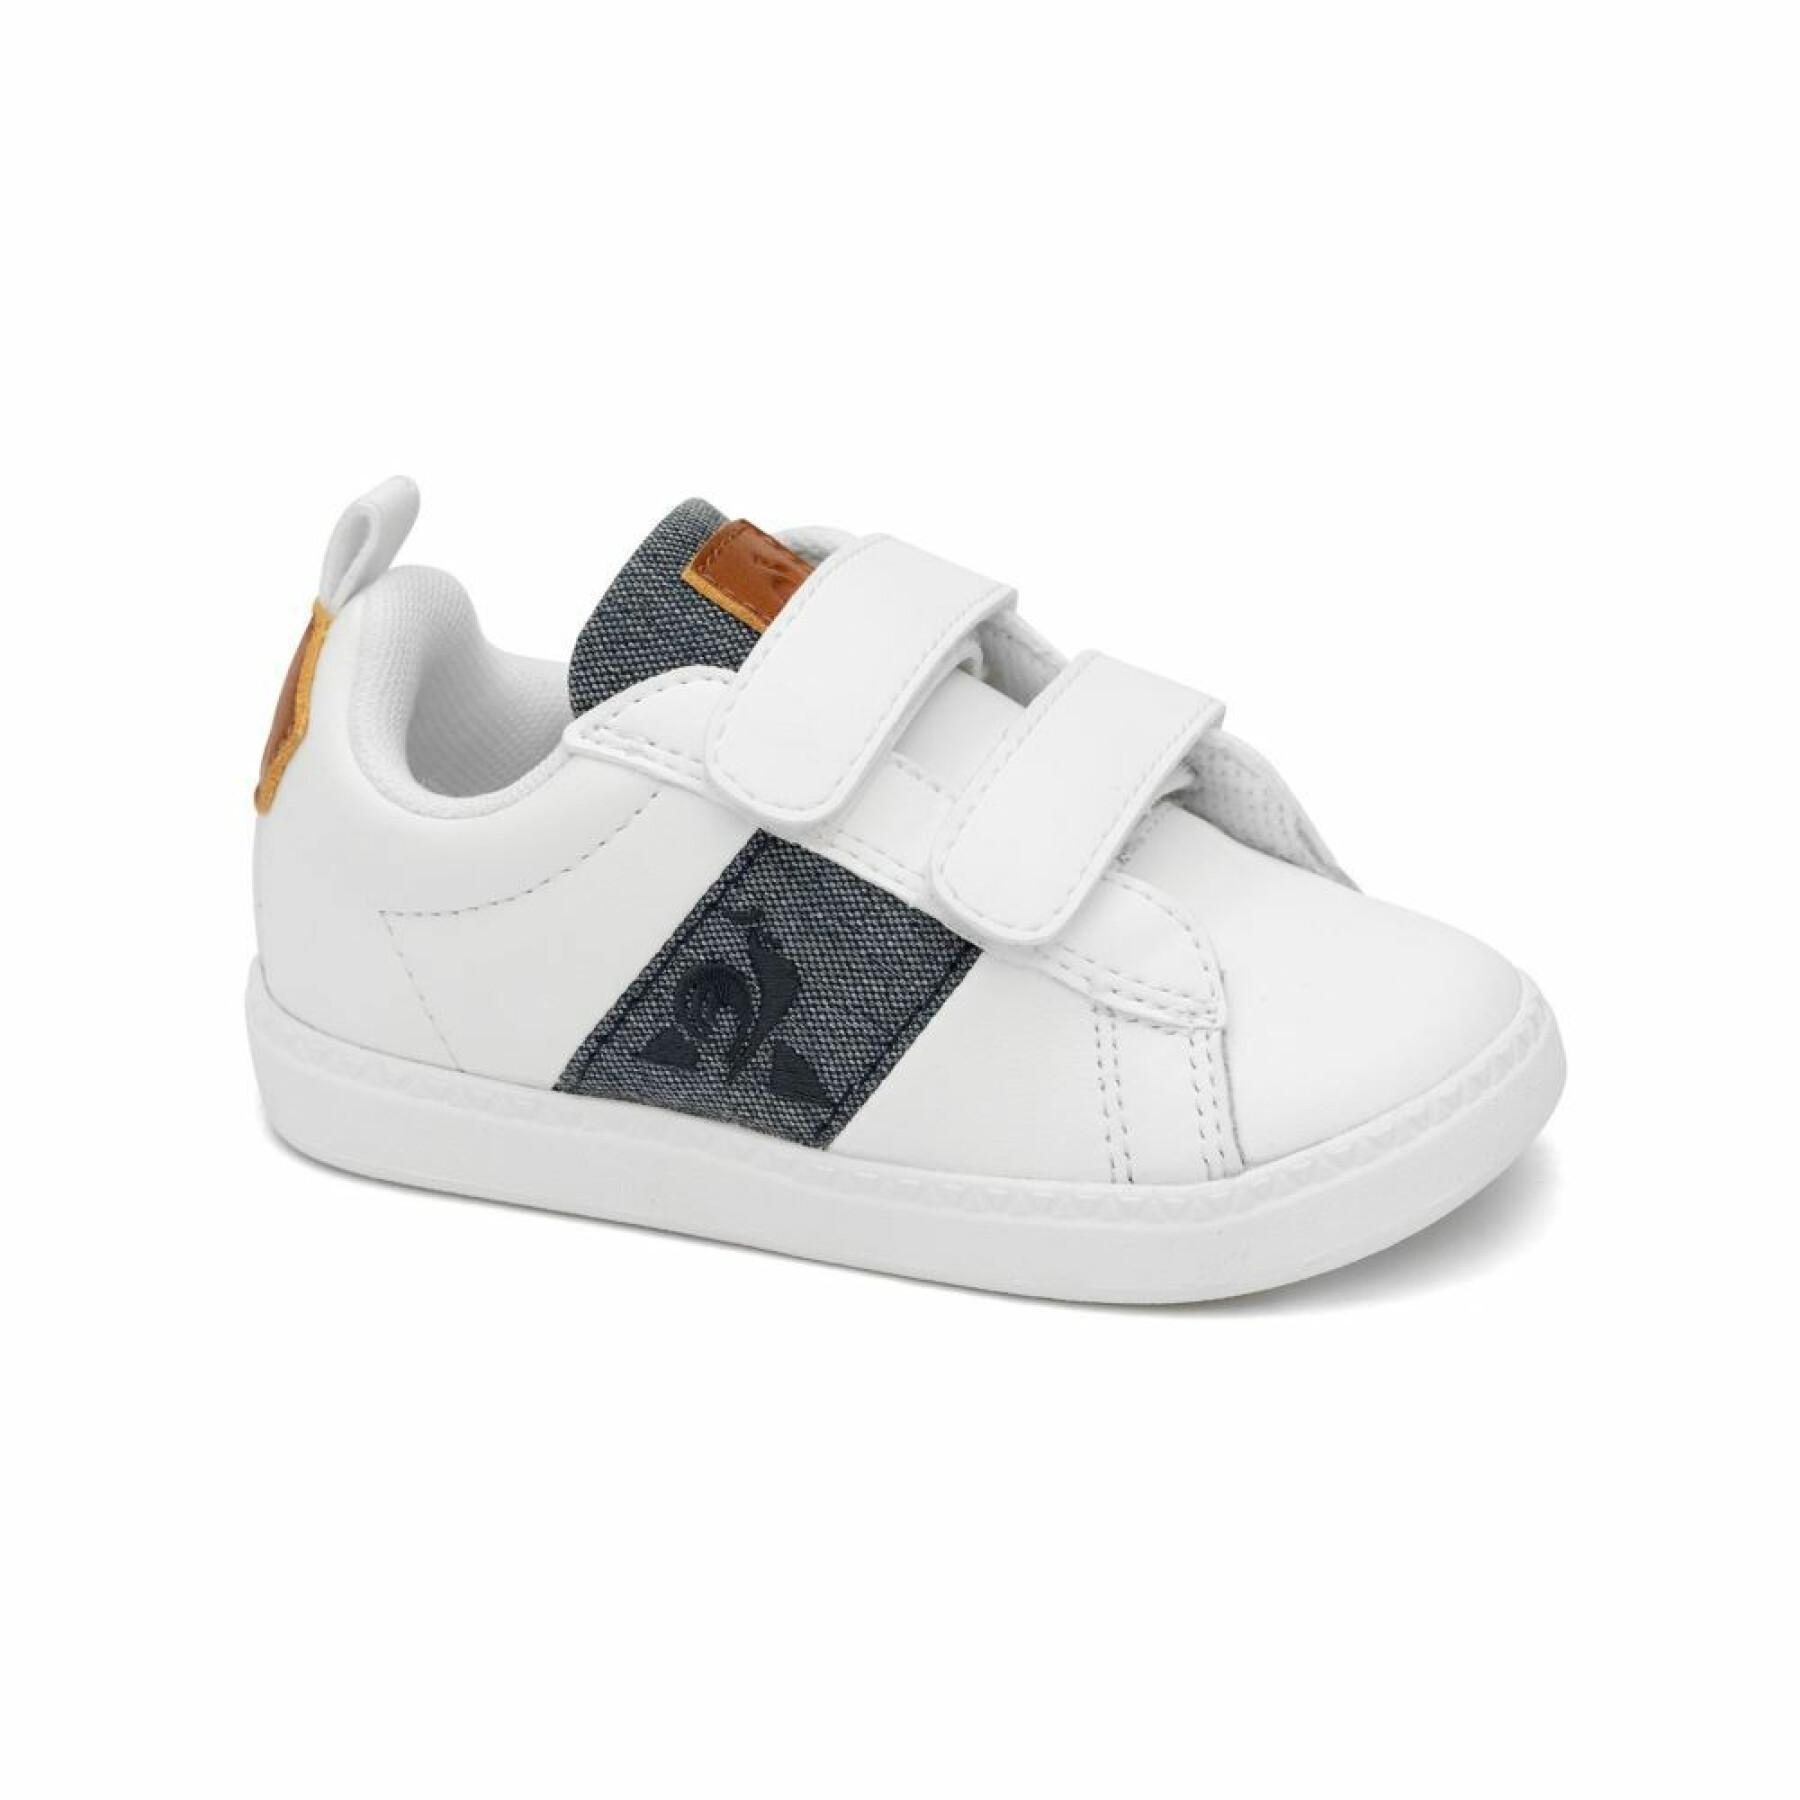 Children's sneakers Le Coq Sportif Courtclassic Inf Workwear